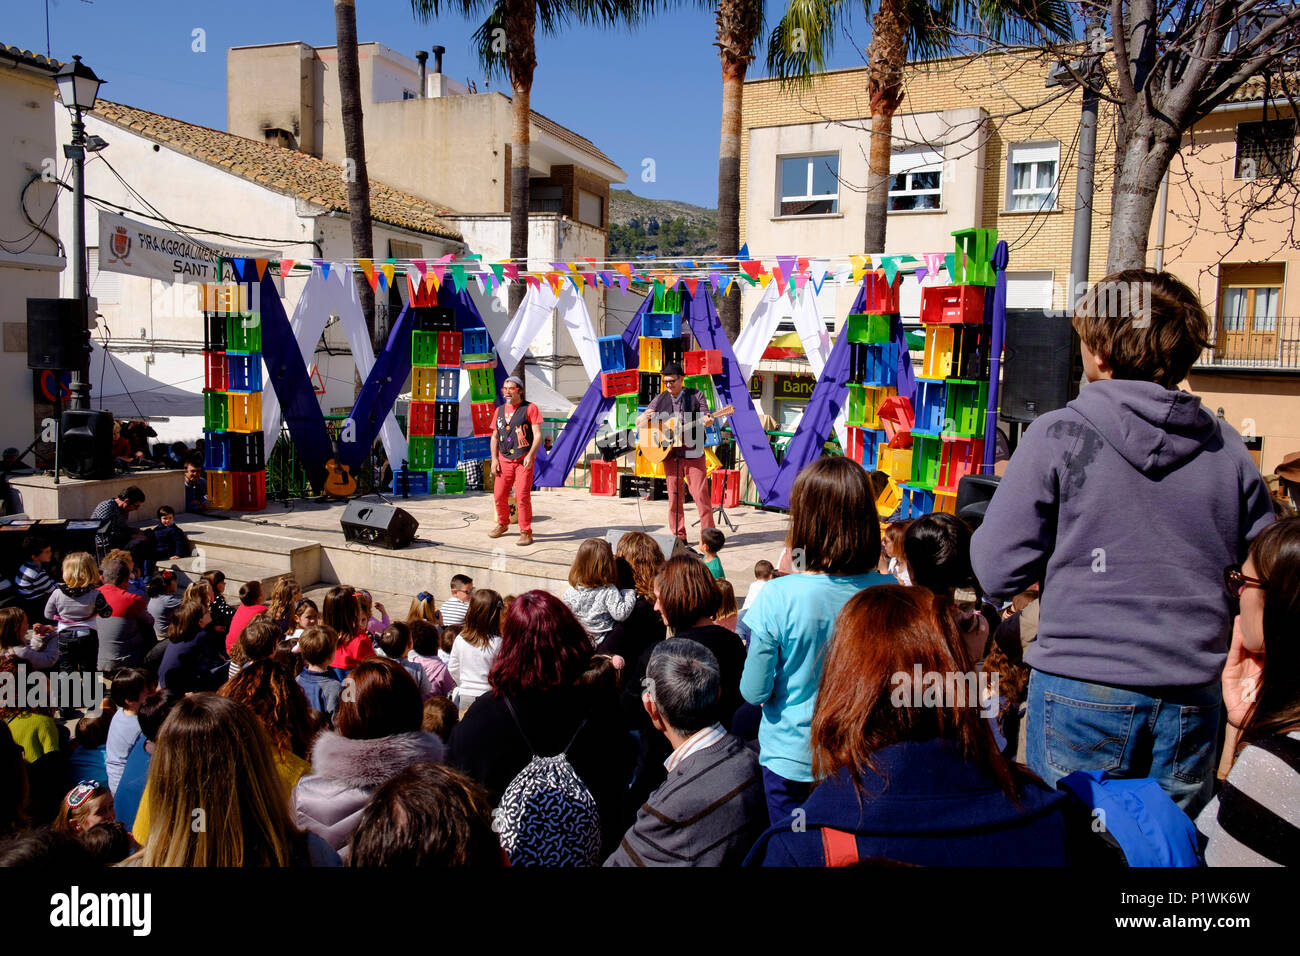 Two comedy entertainers on an outdoor stage watched by a crowd during a Spanish Fiesta Stock Photo